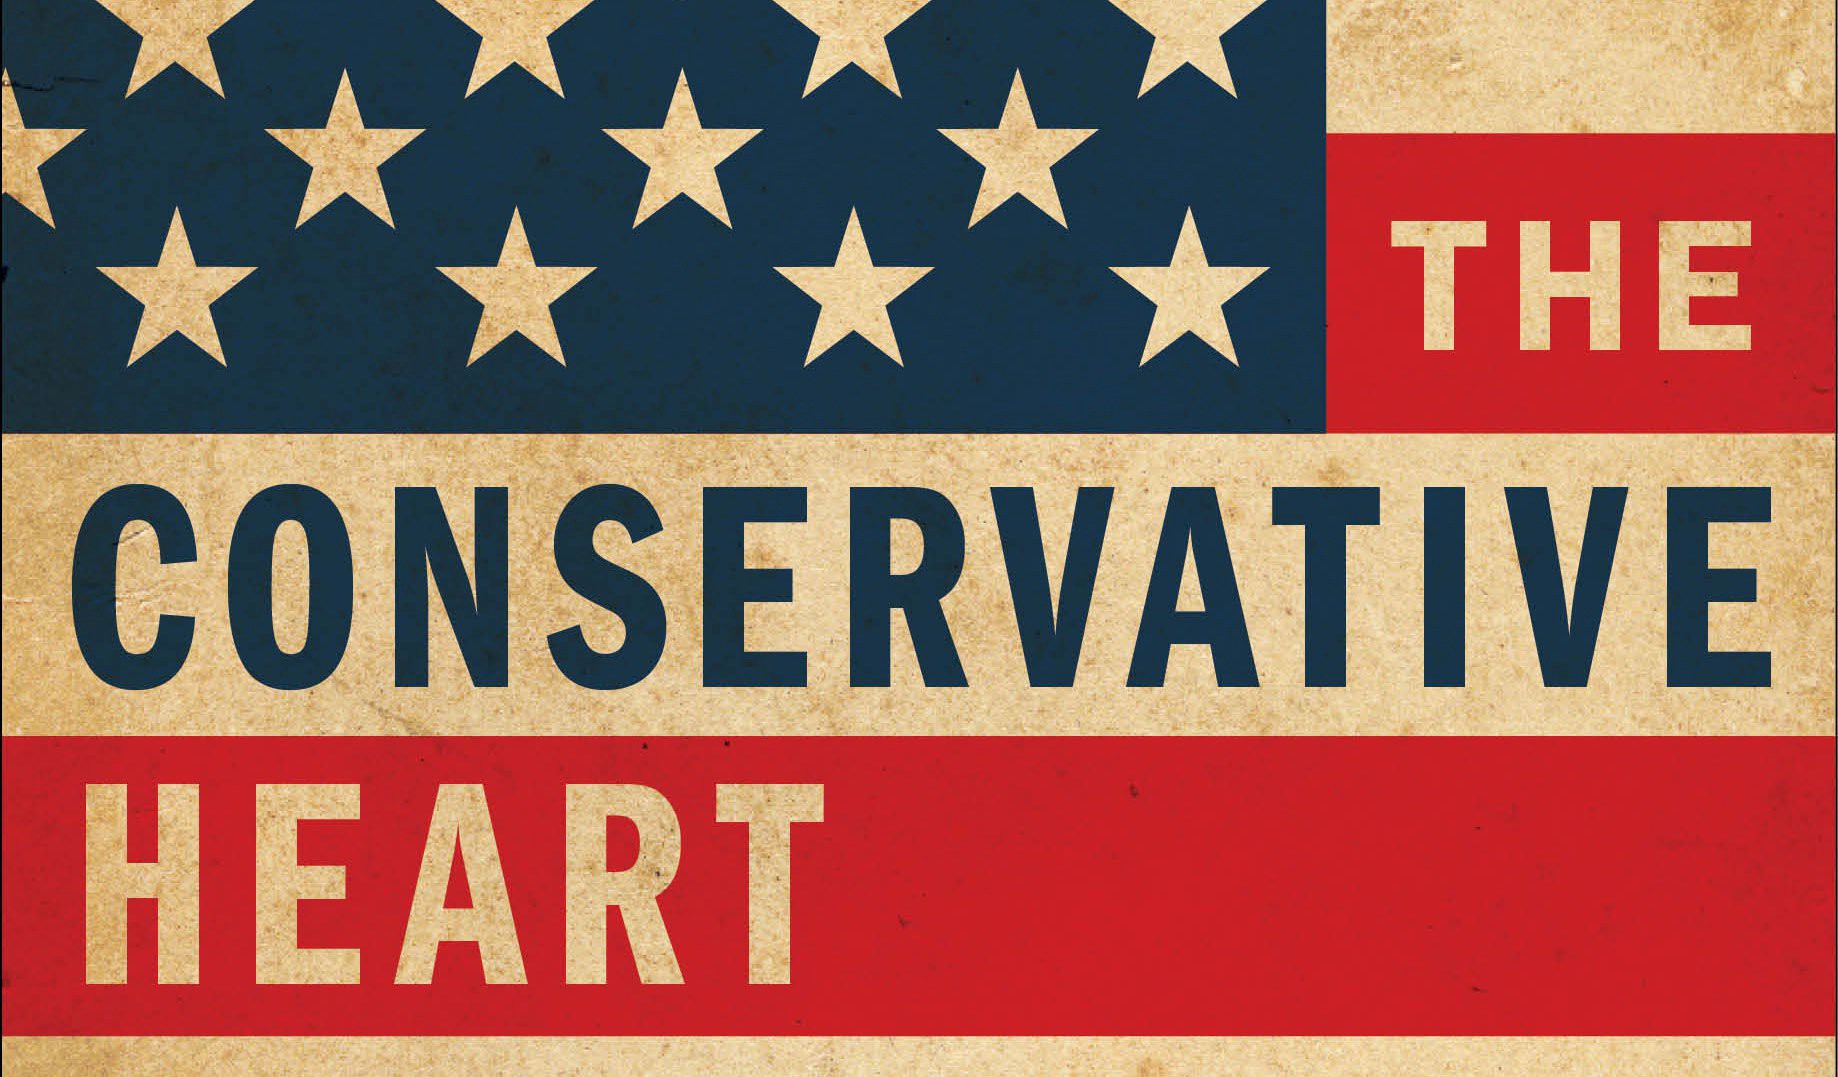 Recommended Read: Conservative Heart